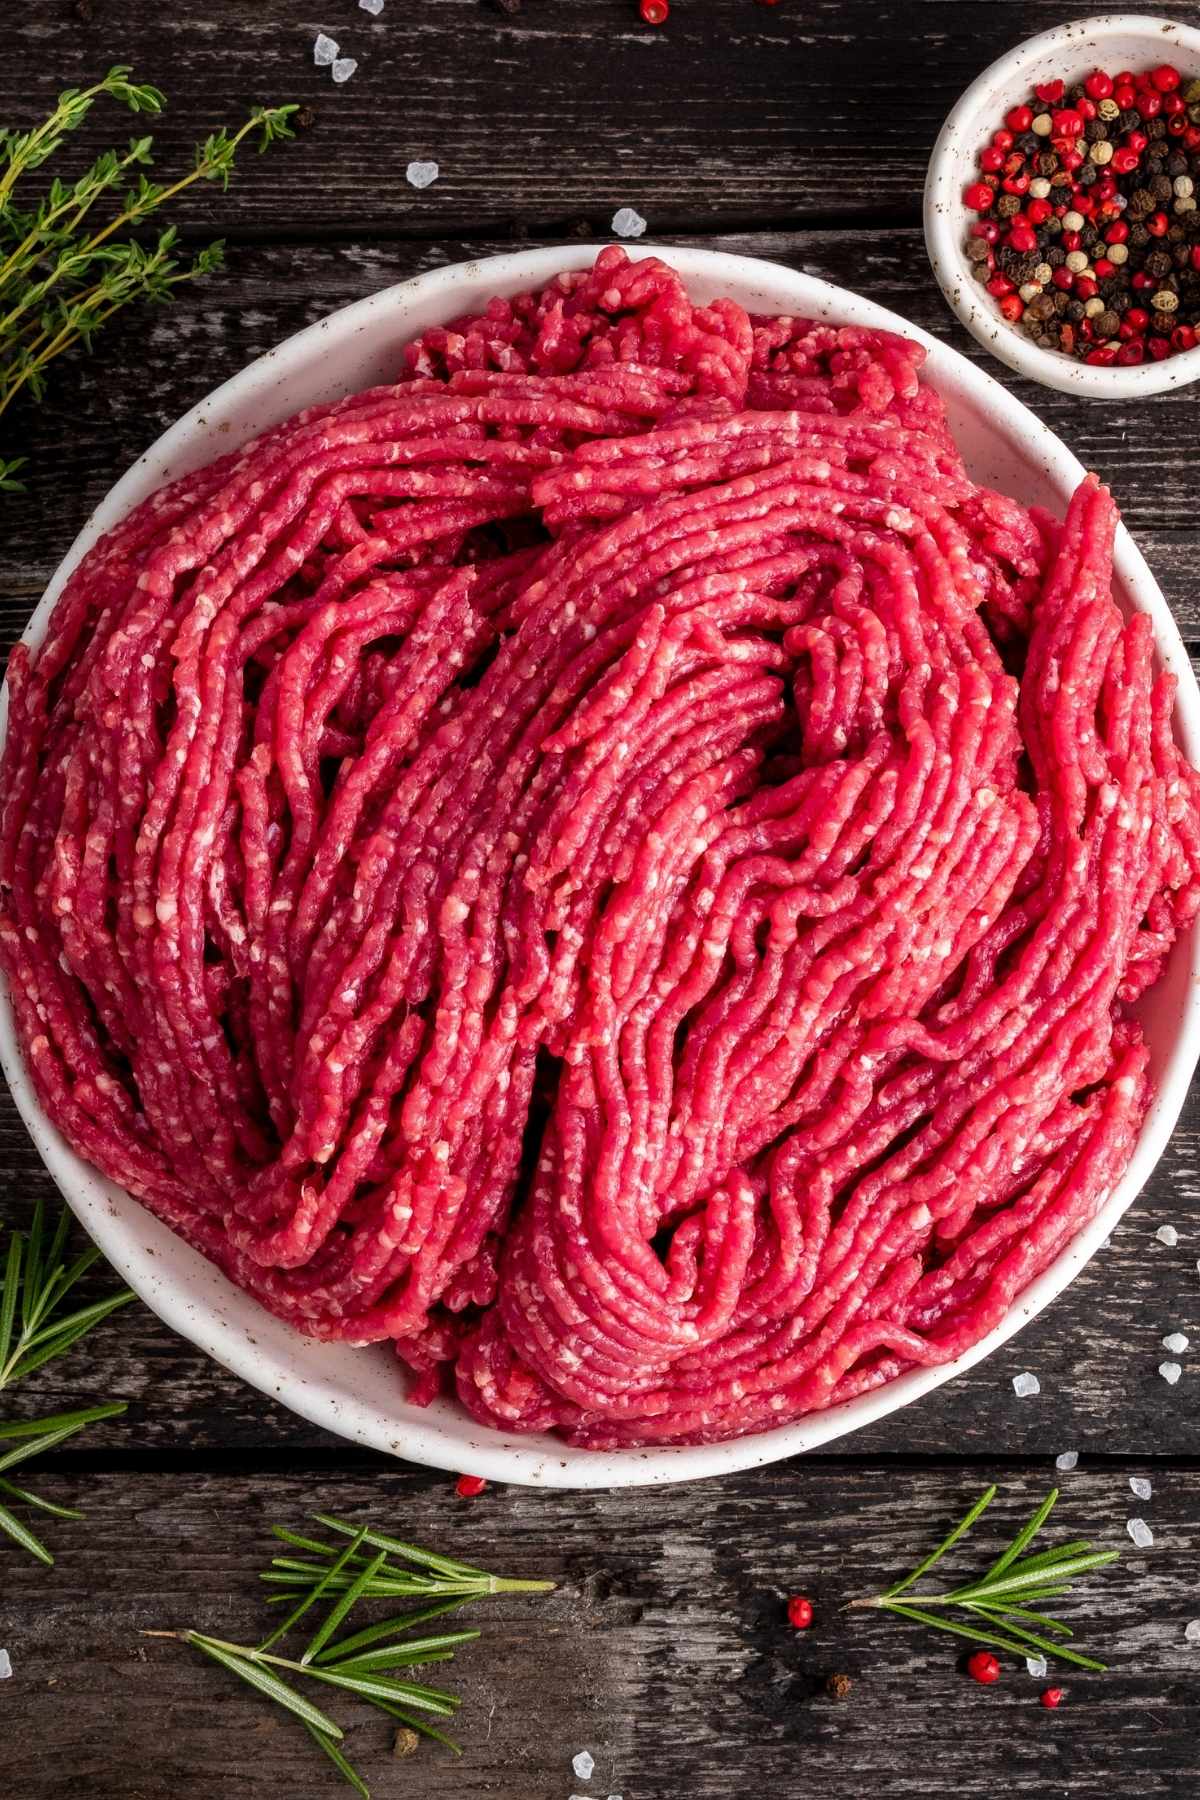 If you’ve ever wondered about the differences between ground chuck and ground beef, this article will help. Today we’re taking a closer look at these two types of ground meat.